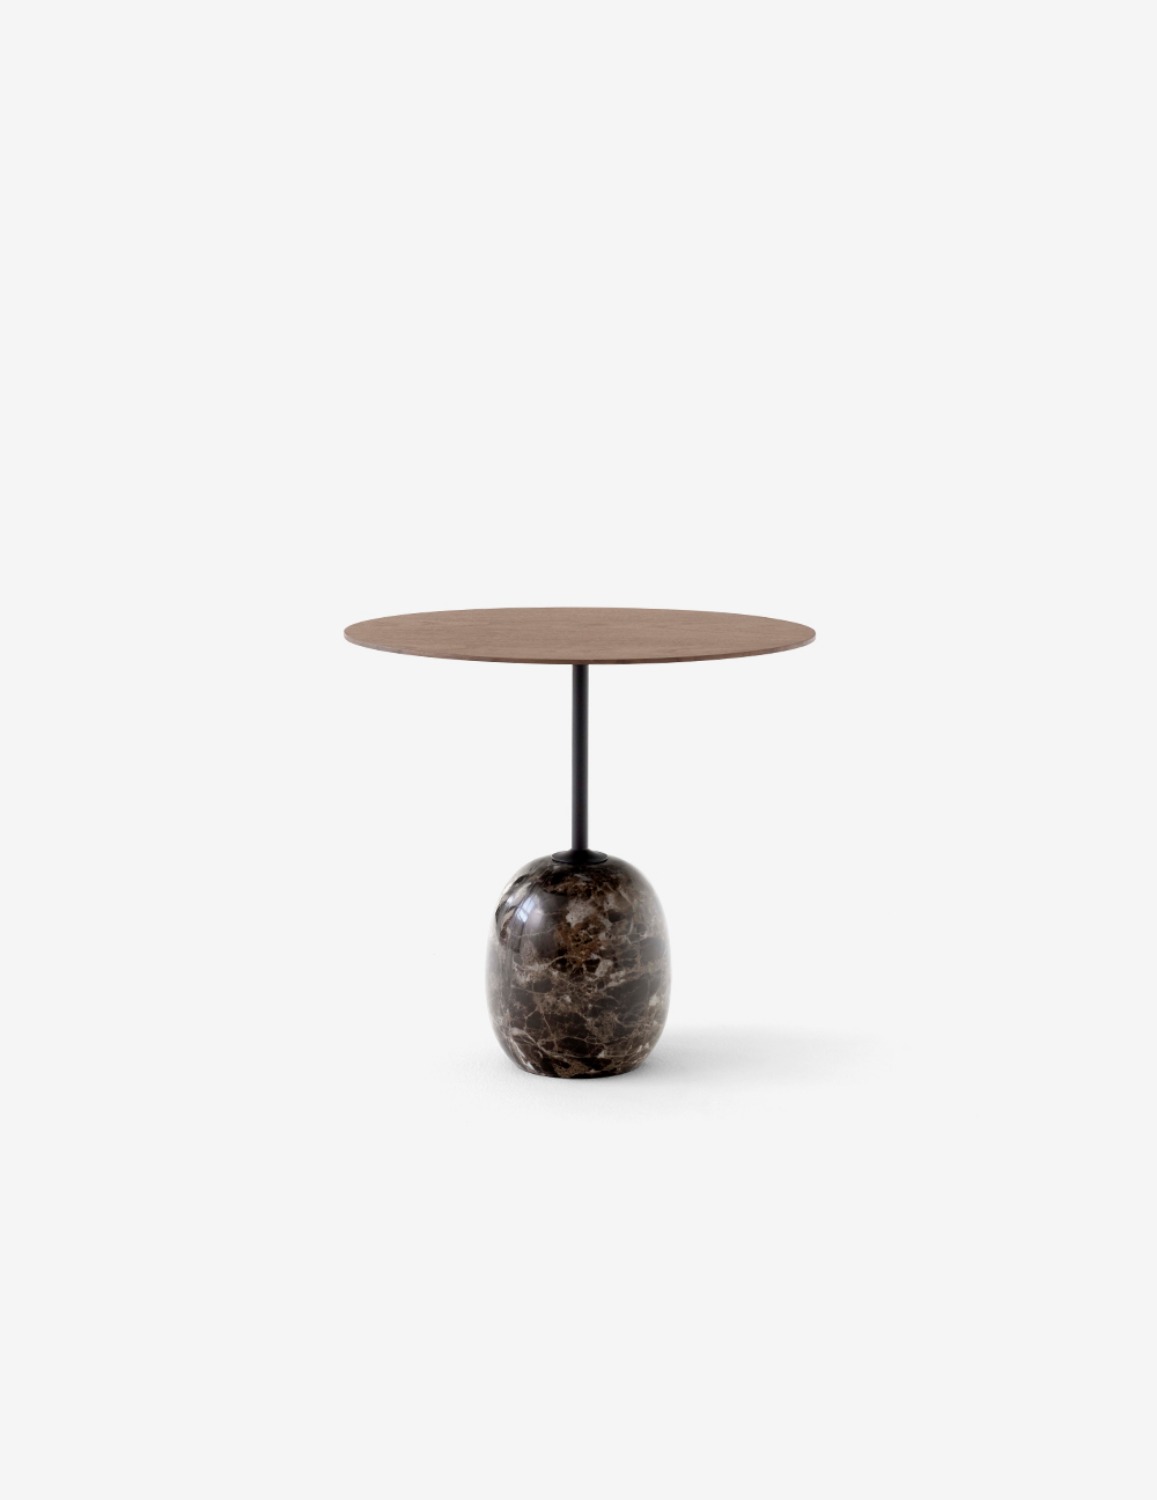 [Andtradition] Lato side table / LN9 (Walnut-Oval)